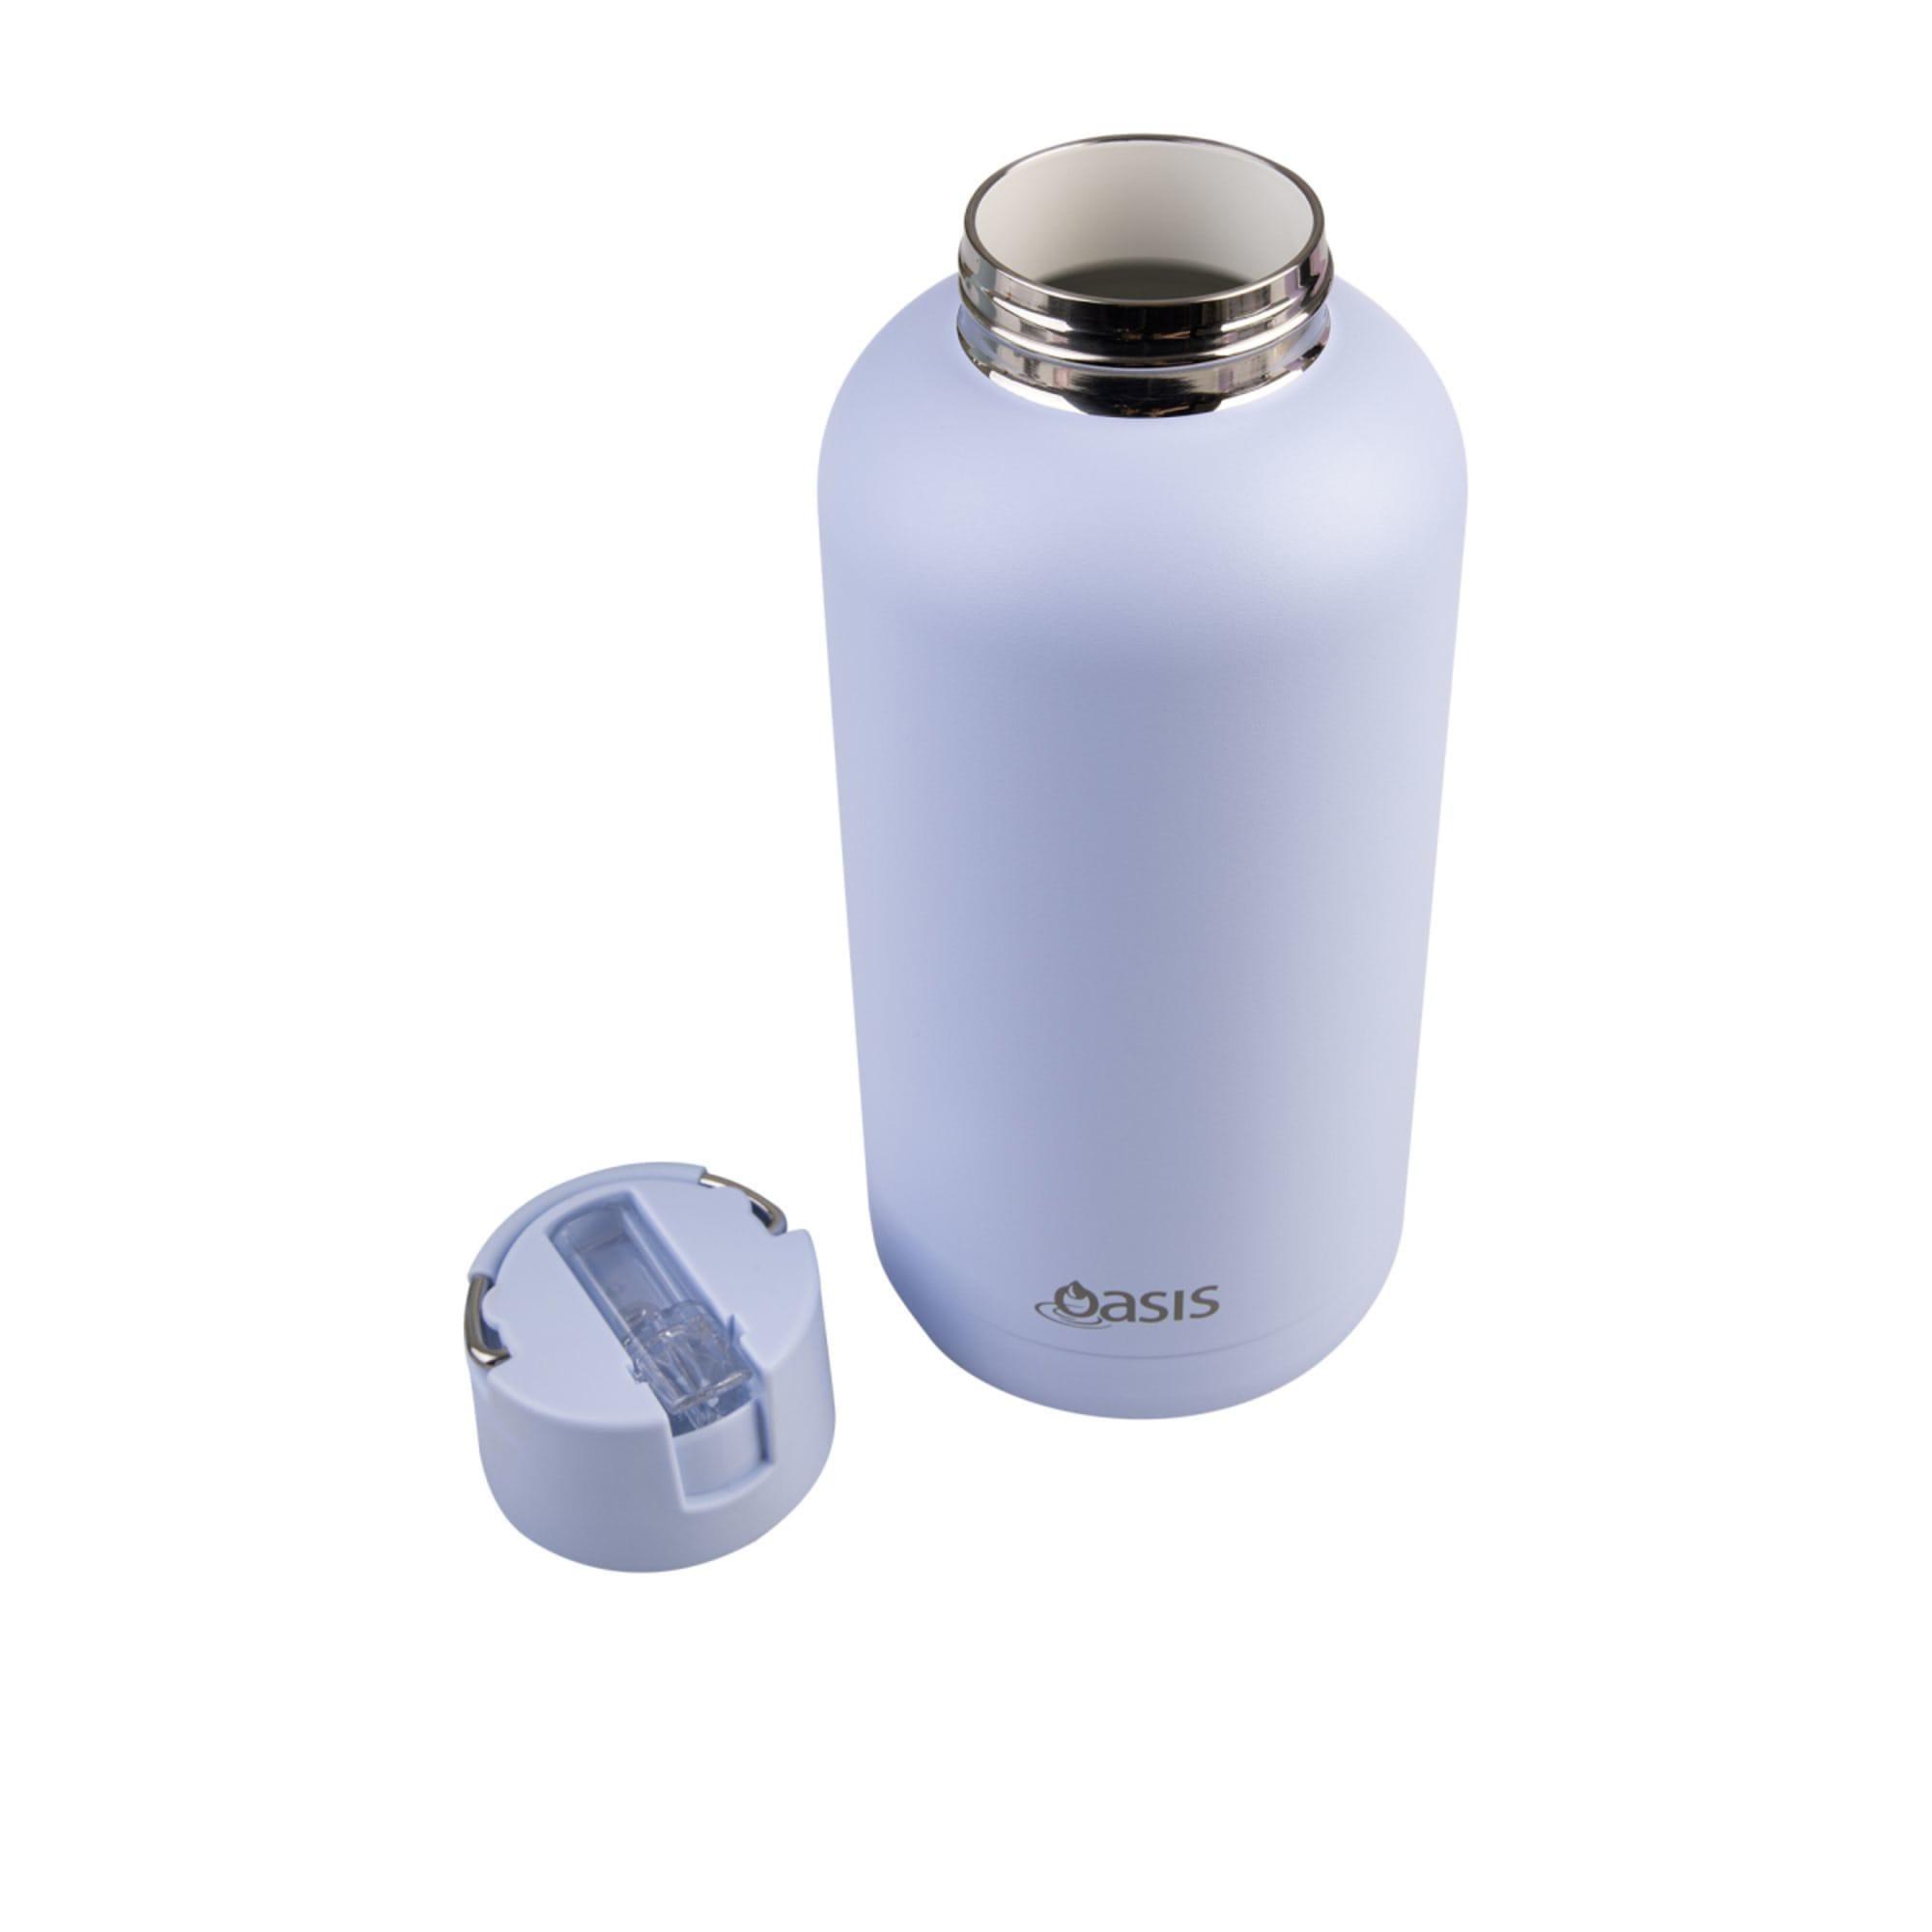 Oasis Moda Triple Wall Insulated Drink Bottle 1.5L Periwinkle Image 5